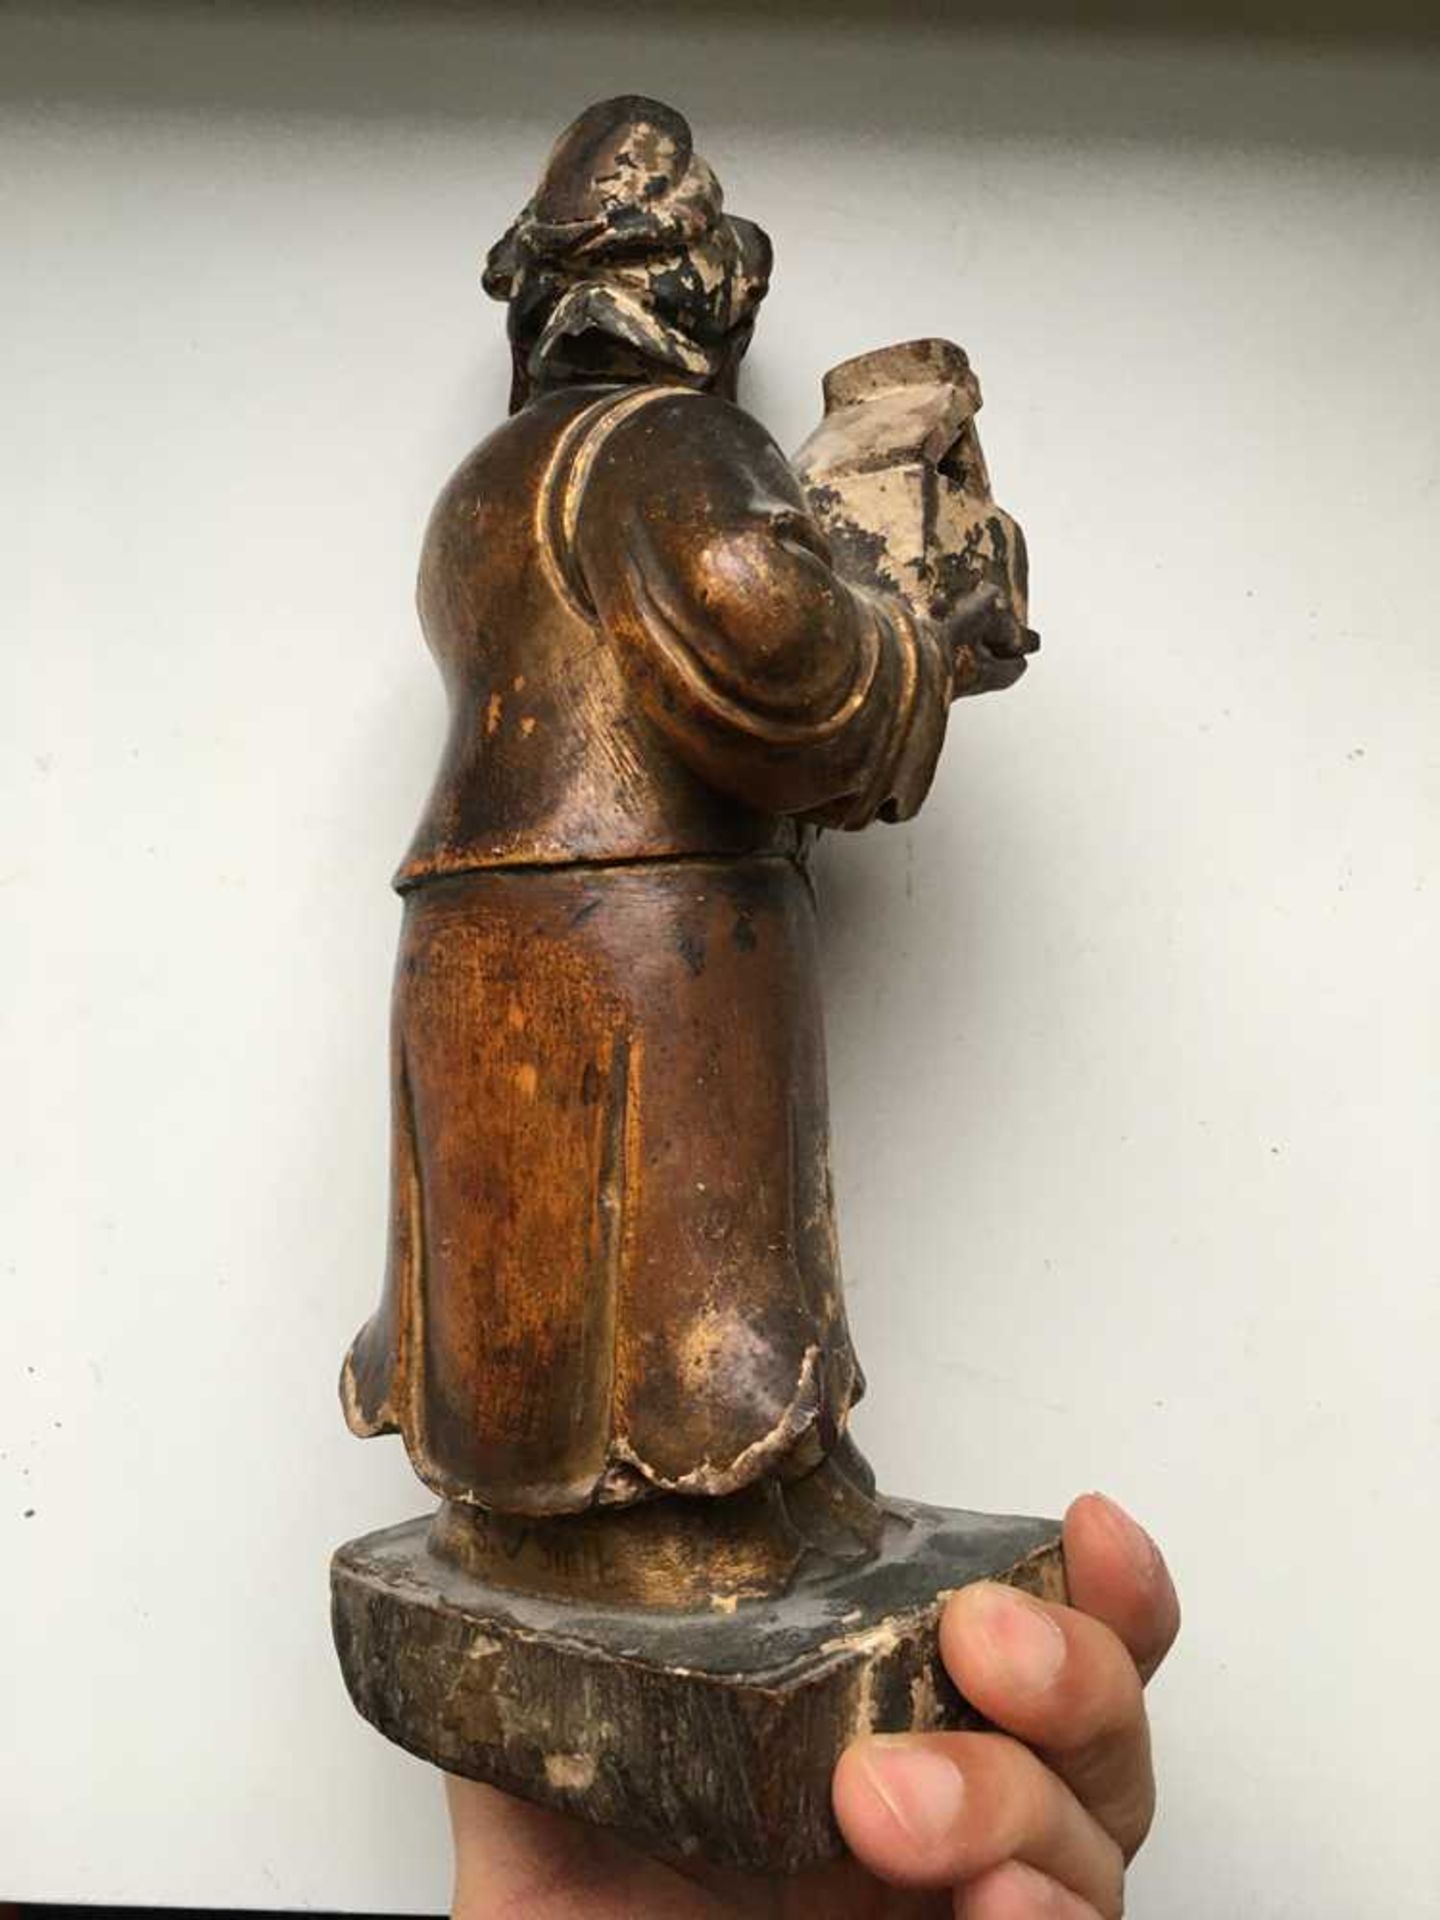 GILT-LACQUERED WOODEN FIGURE OF A DAOIST IMMORTAL QING DYNASTY, 18TH-19TH CENTURY - Image 8 of 20